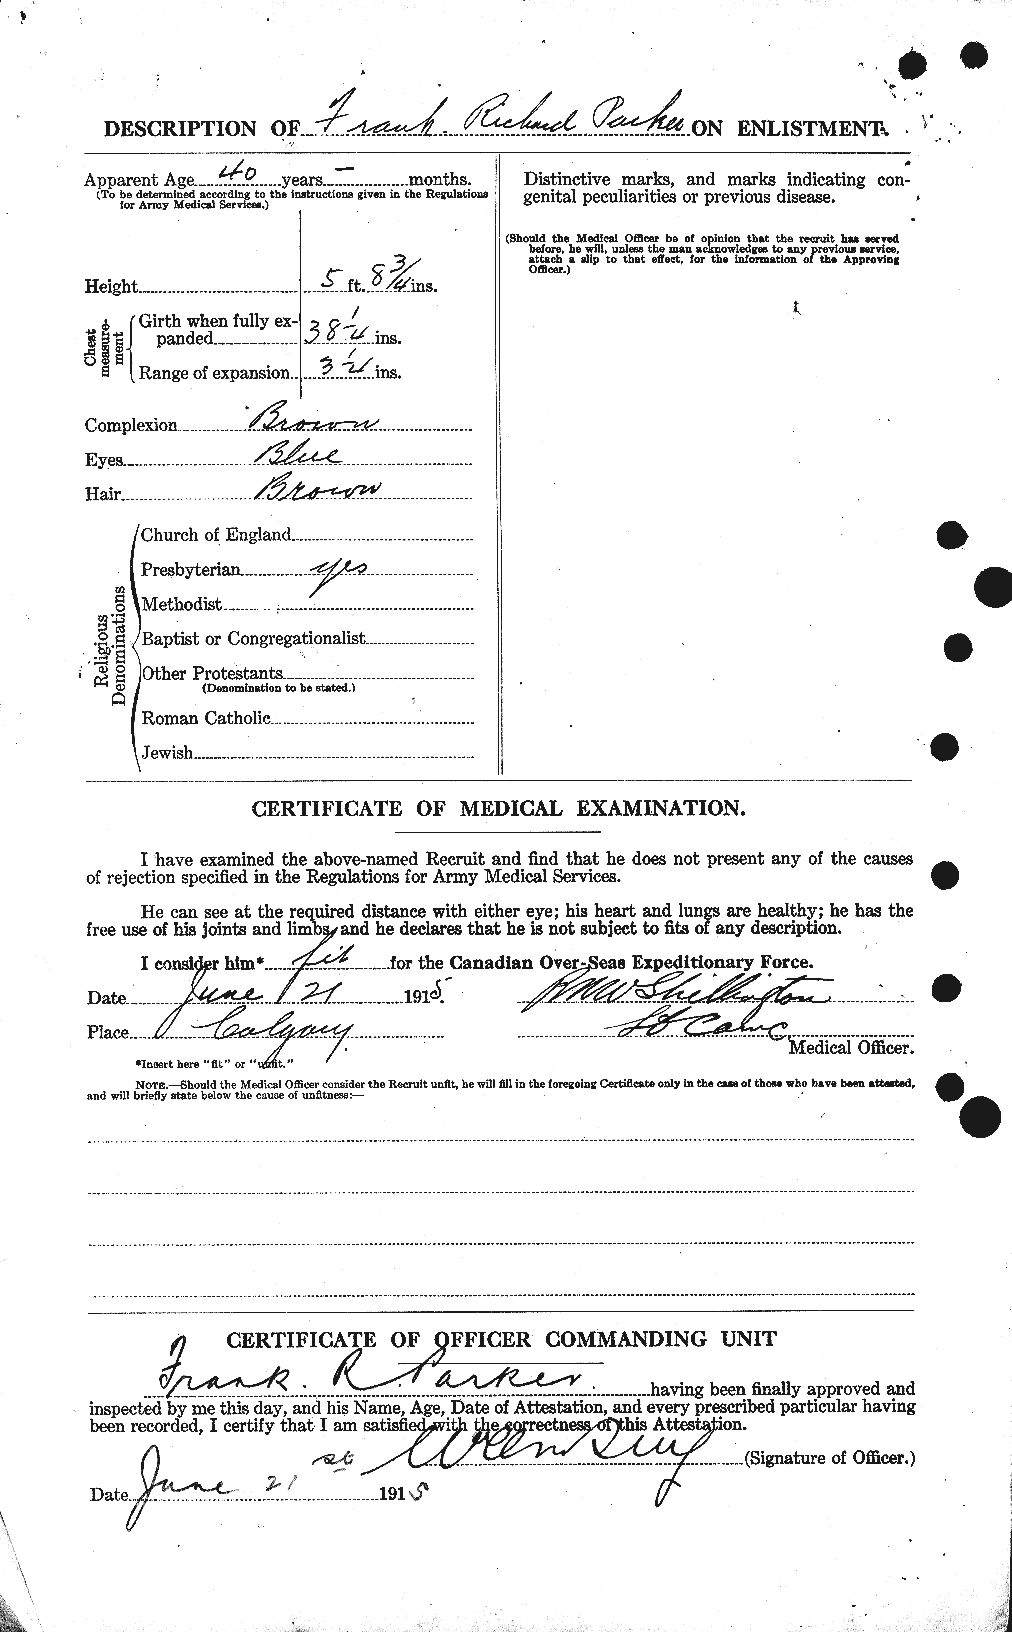 Personnel Records of the First World War - CEF 565193b